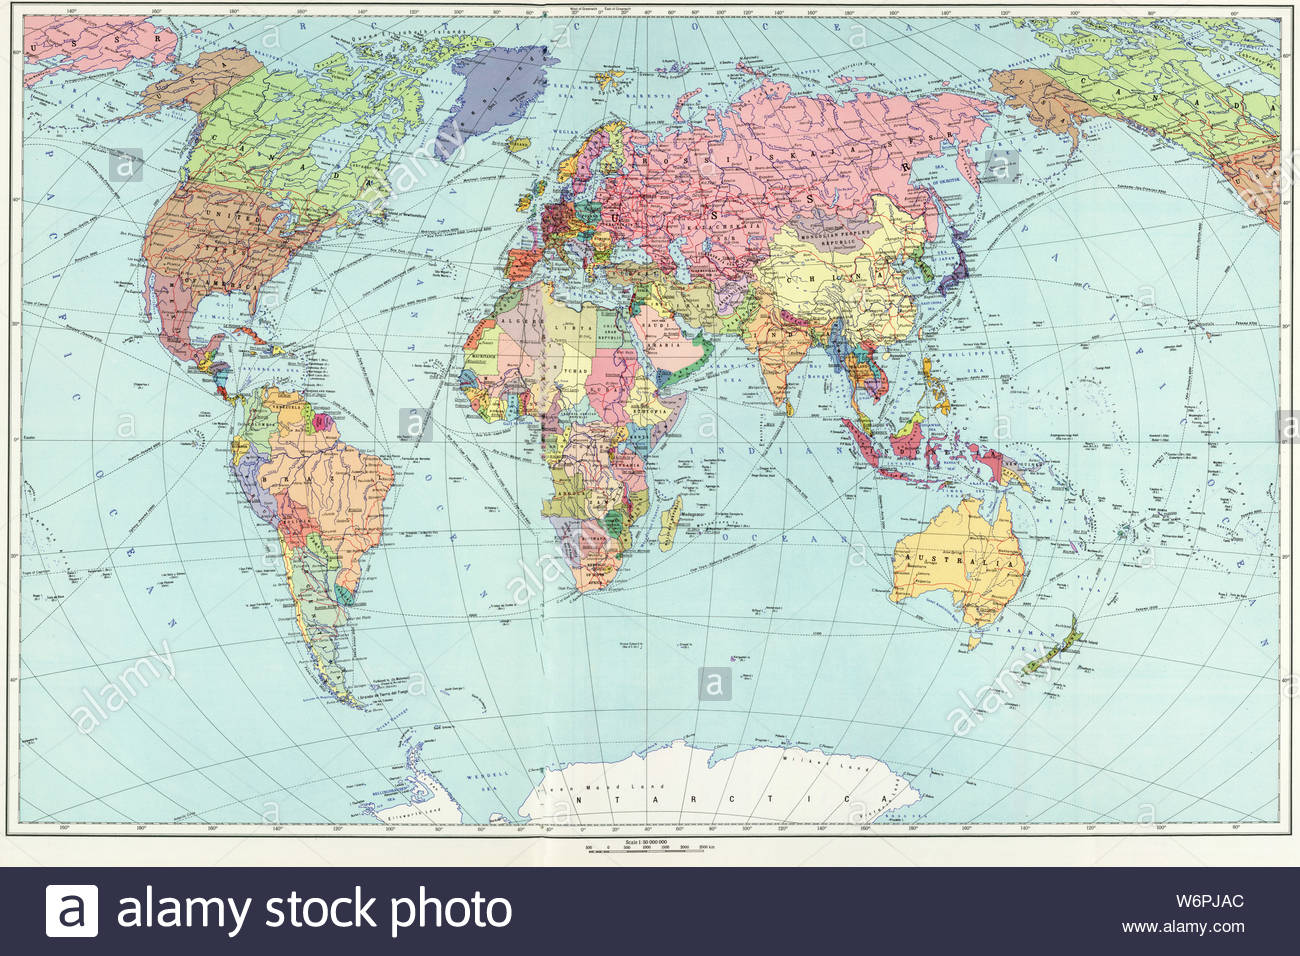 World Map High Resolution Free Download World Map Wallpapers High